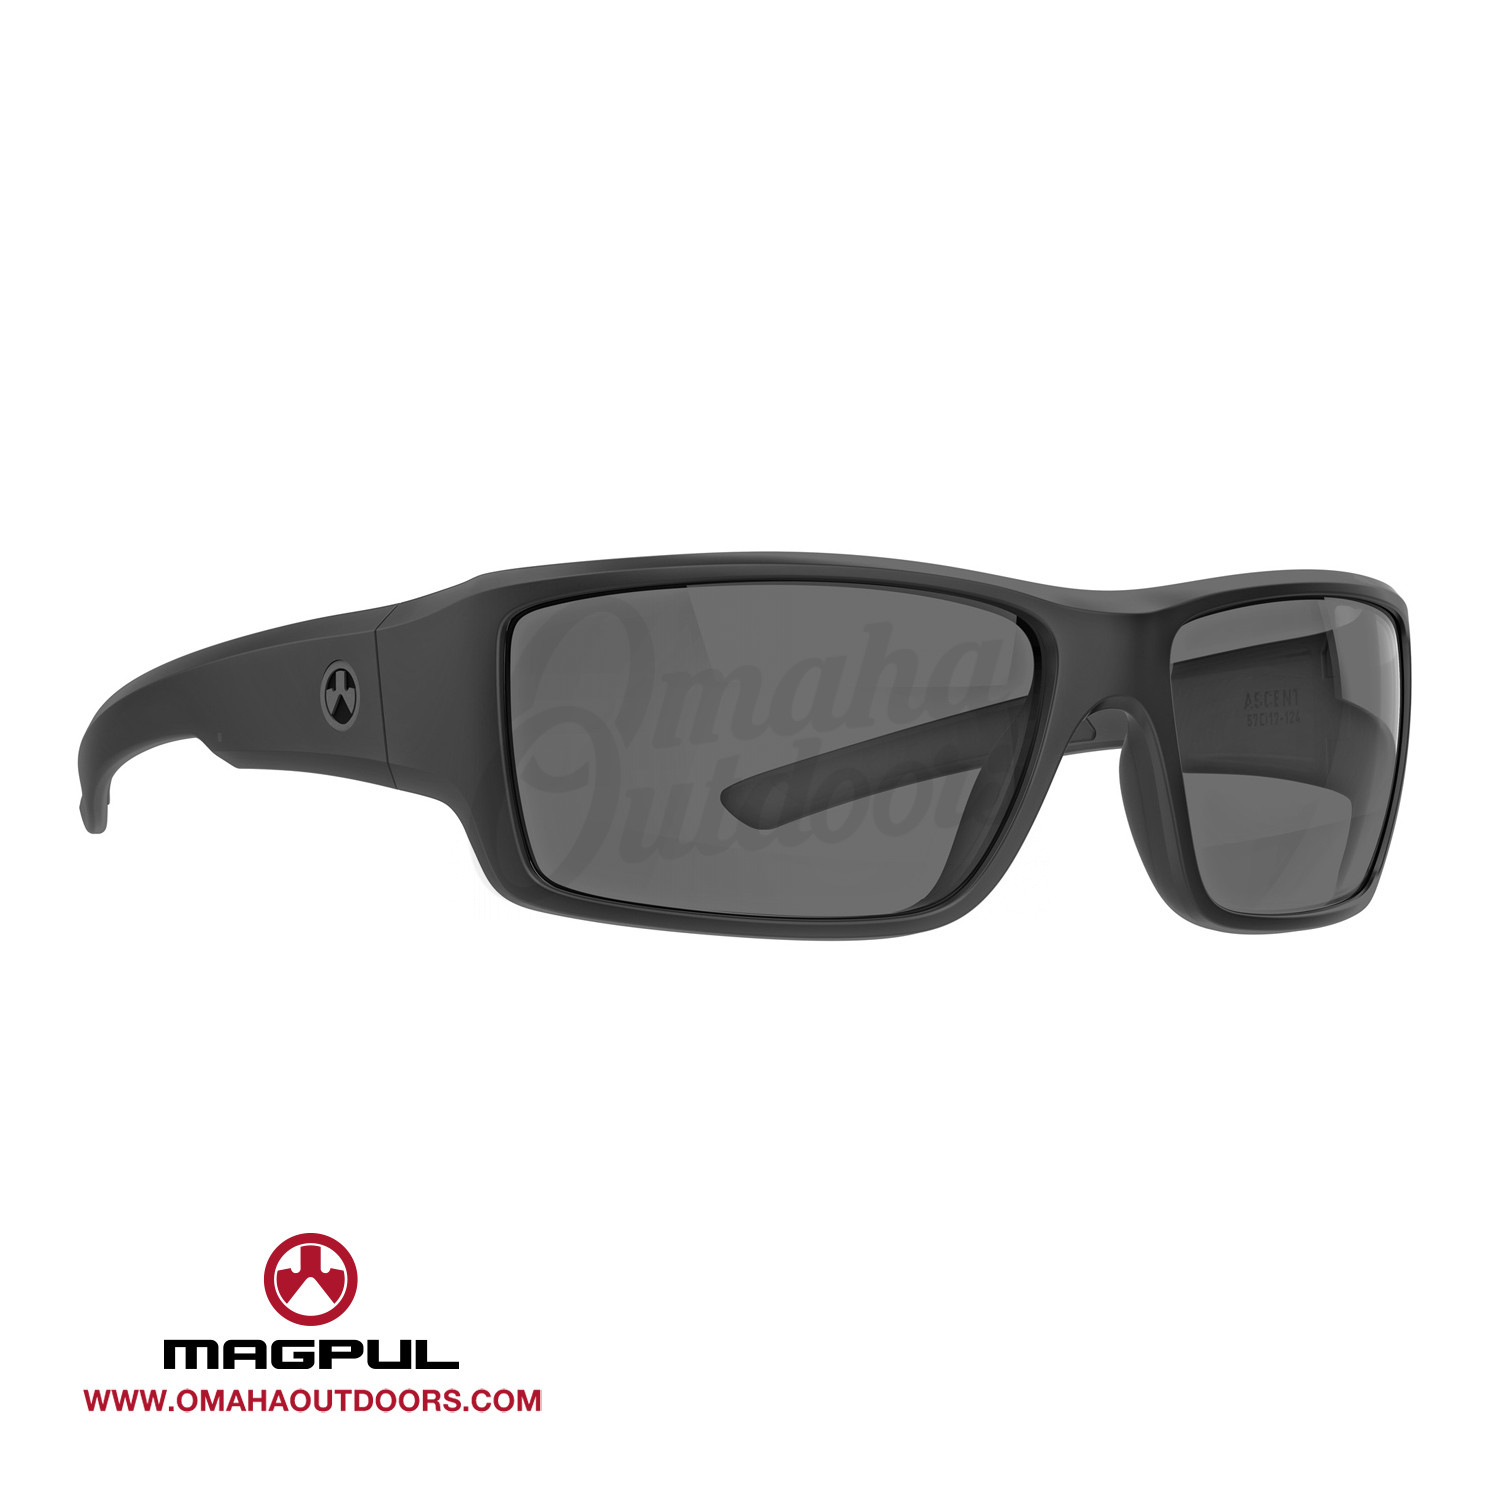 Magpul Ascent Gray Sunglasses Green Lens - In Stock